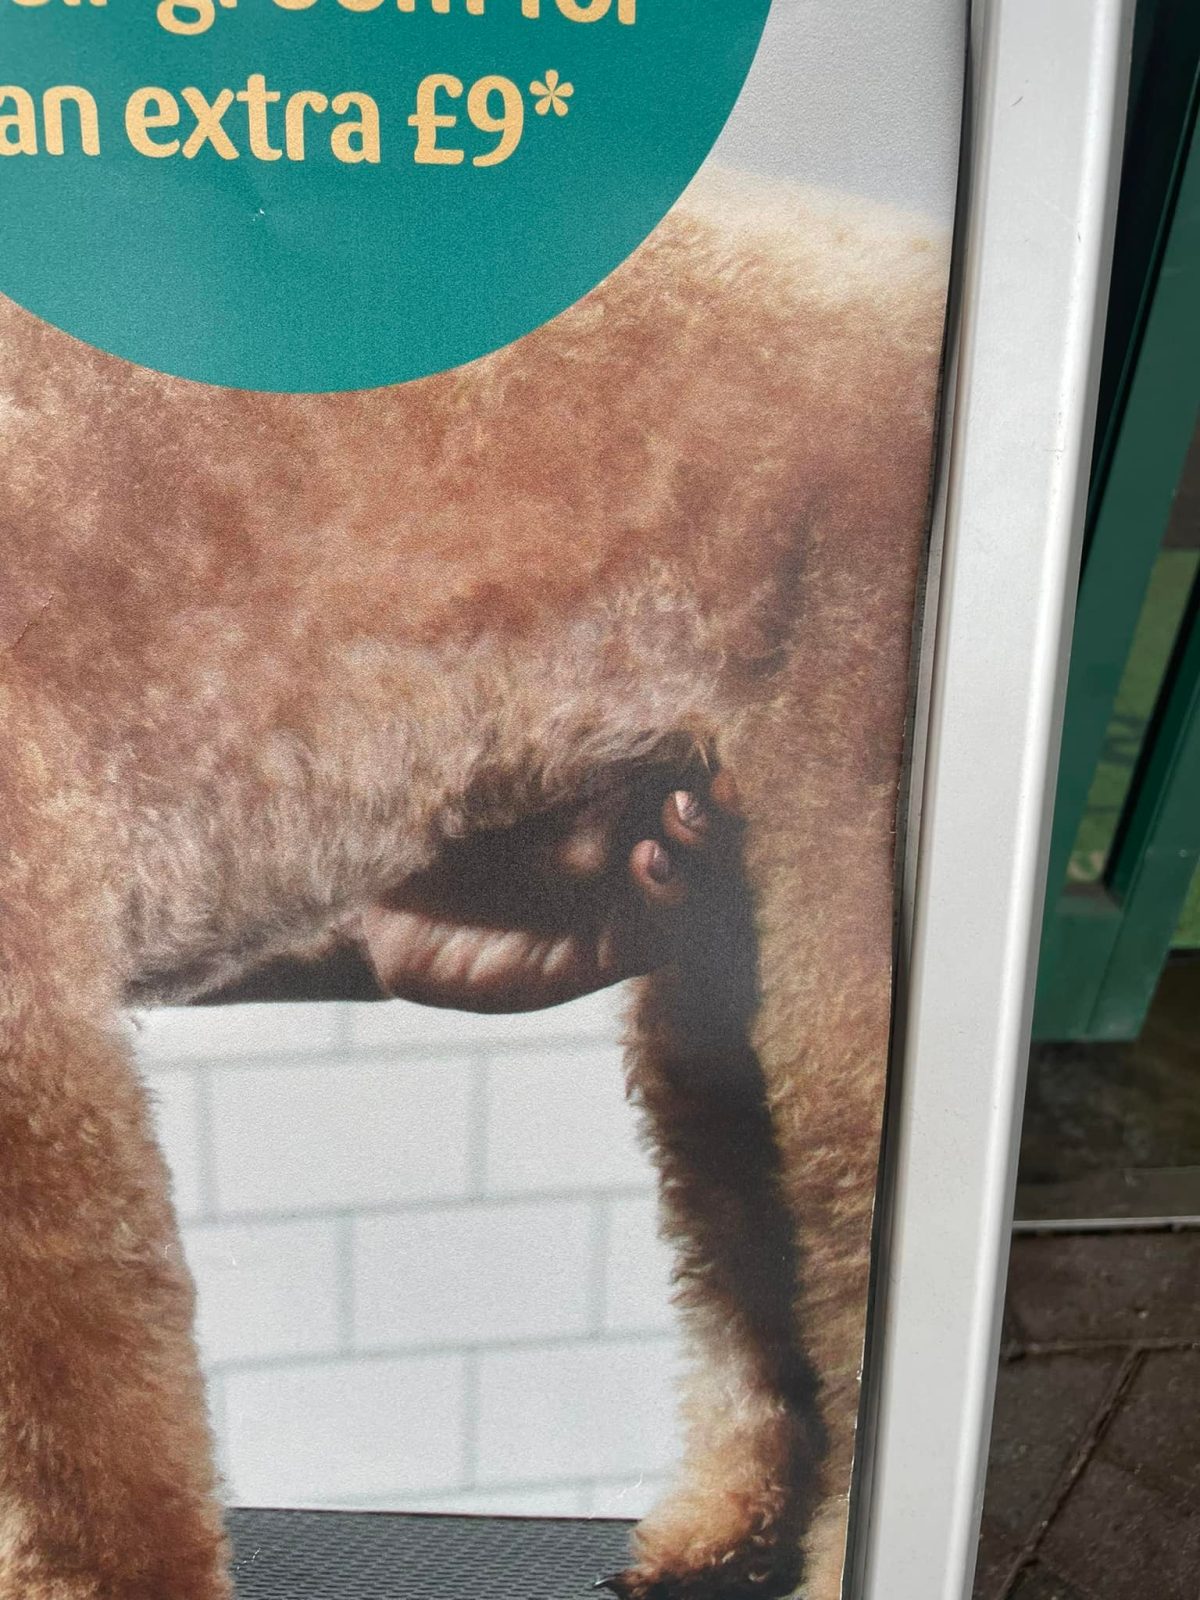 Pets at Home mocked for poster showing groomer &#8216;cupping dog&#8217;s genitals&#8217;, The Manc